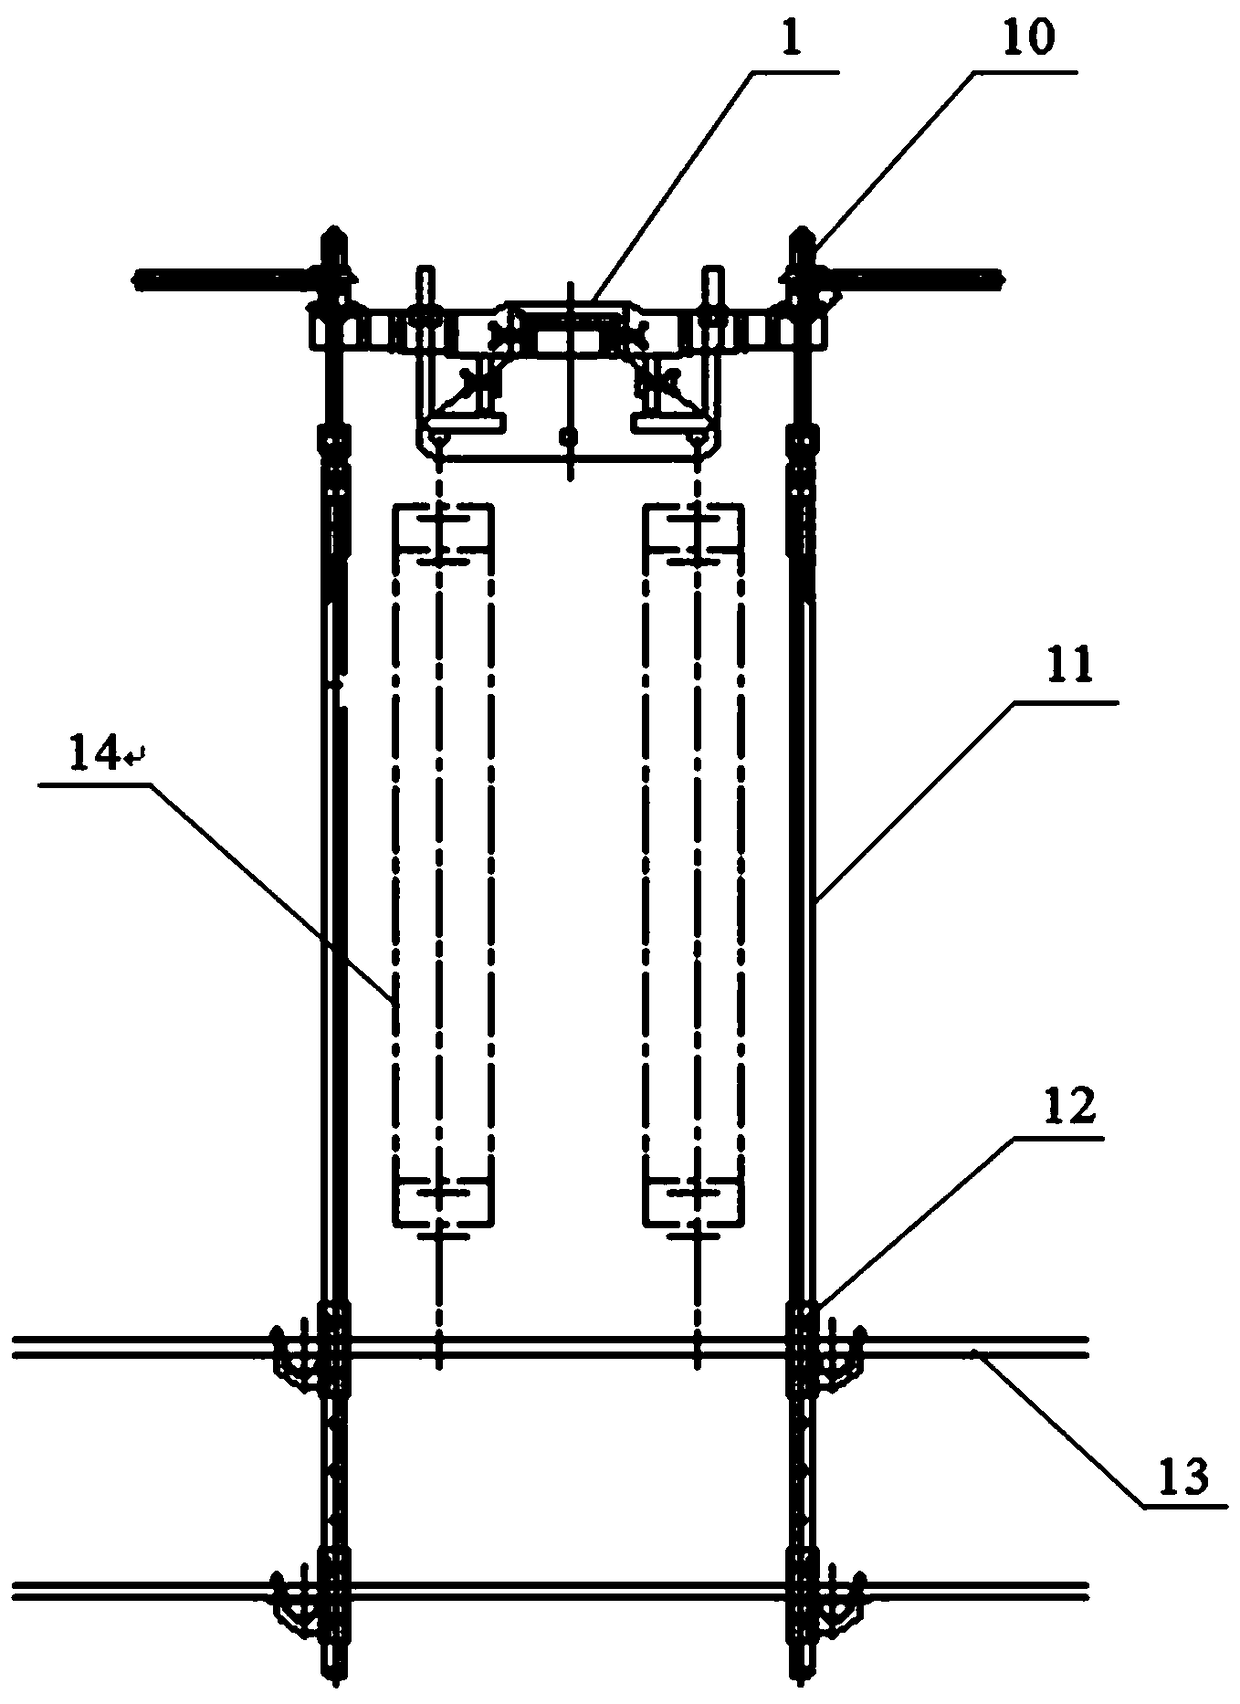 Cross-arm jig for replacing insulators with double-circuit steel pipe poles on the same tower